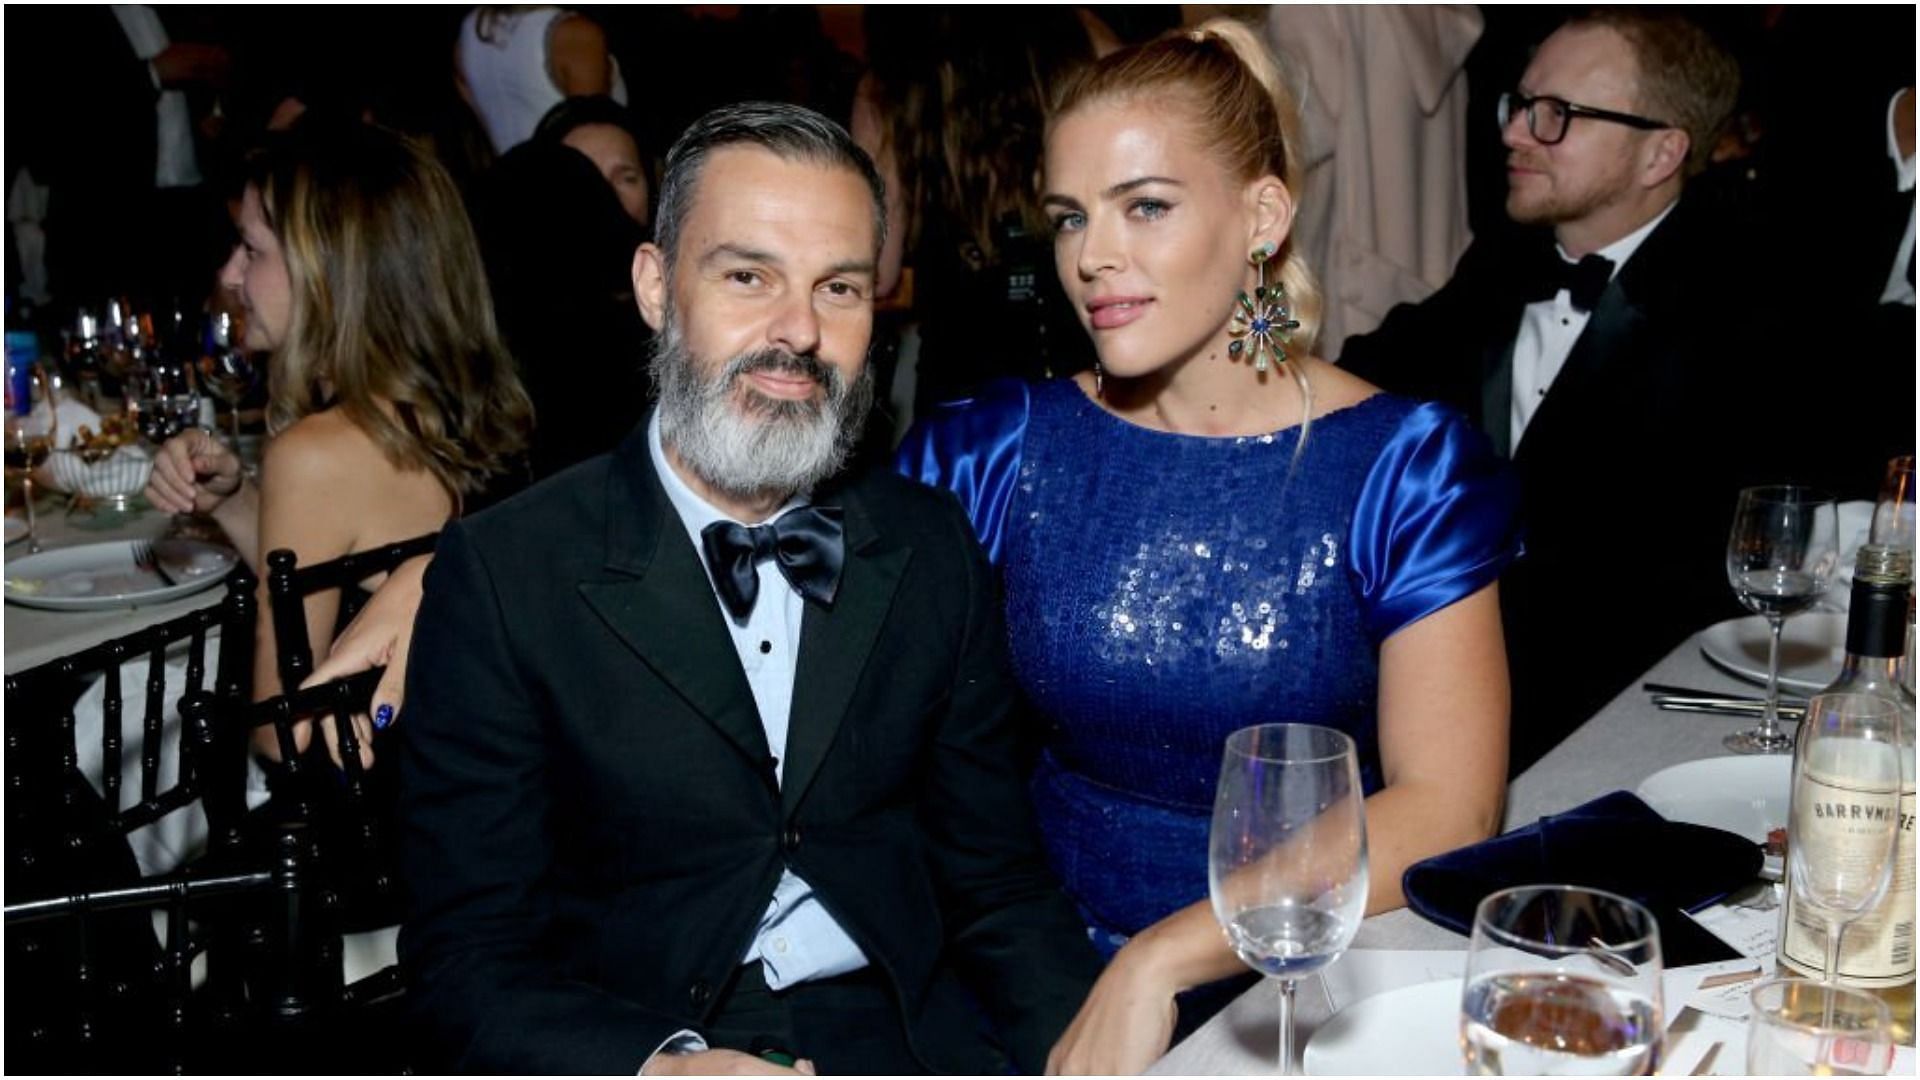 Busy Philipps and Marc Silverstein got married in 2007 (Image via Phillip Faraone/Getty Images)